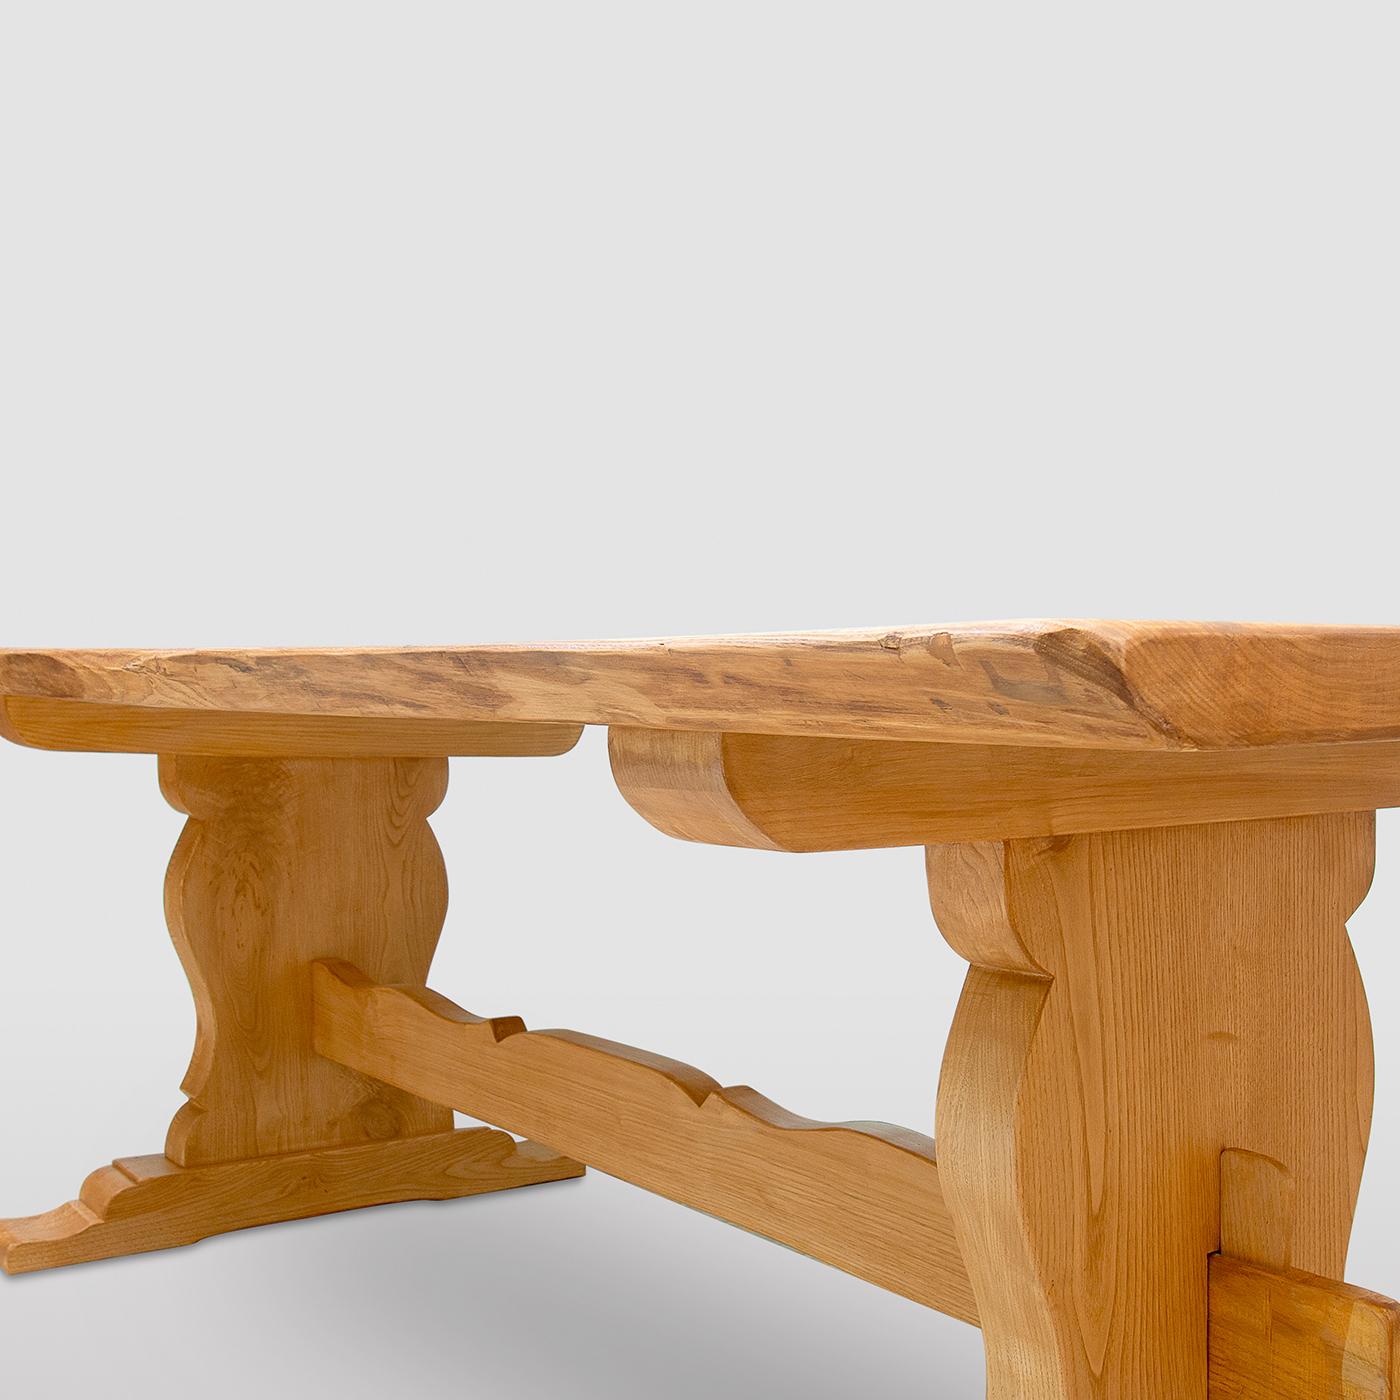 A superb addition to mountain or countryside cabin decor with the signature class of rustic, handmade furniture, this refined dining table is fashioned of solid chestnut. Each element is directly sourced from the barkless trunk and deliberately